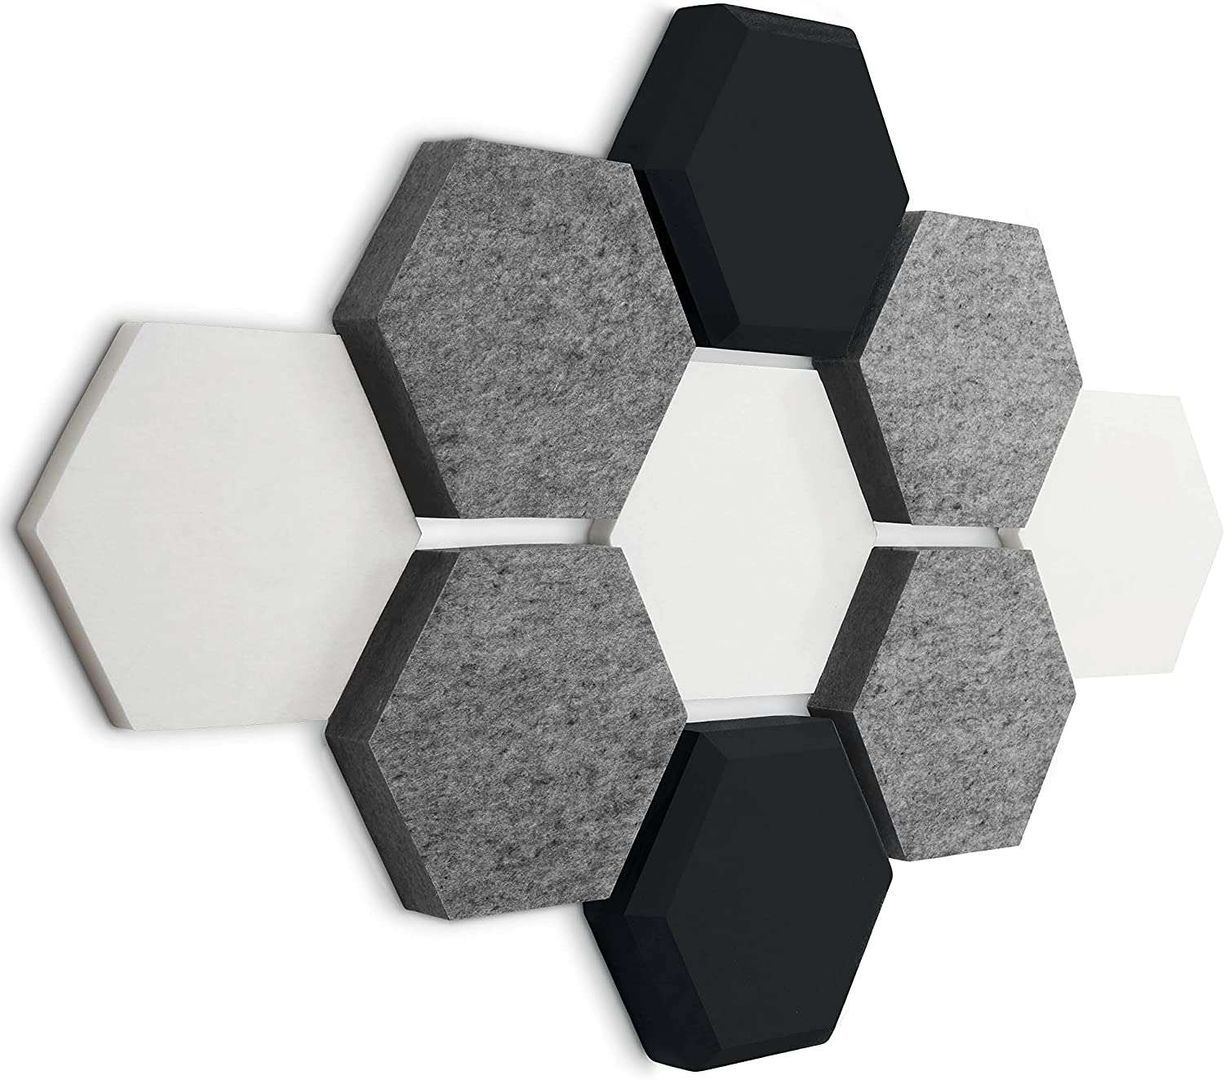 Sound Absorber Wall, Press profile homify Press profile homify غرف تخزين